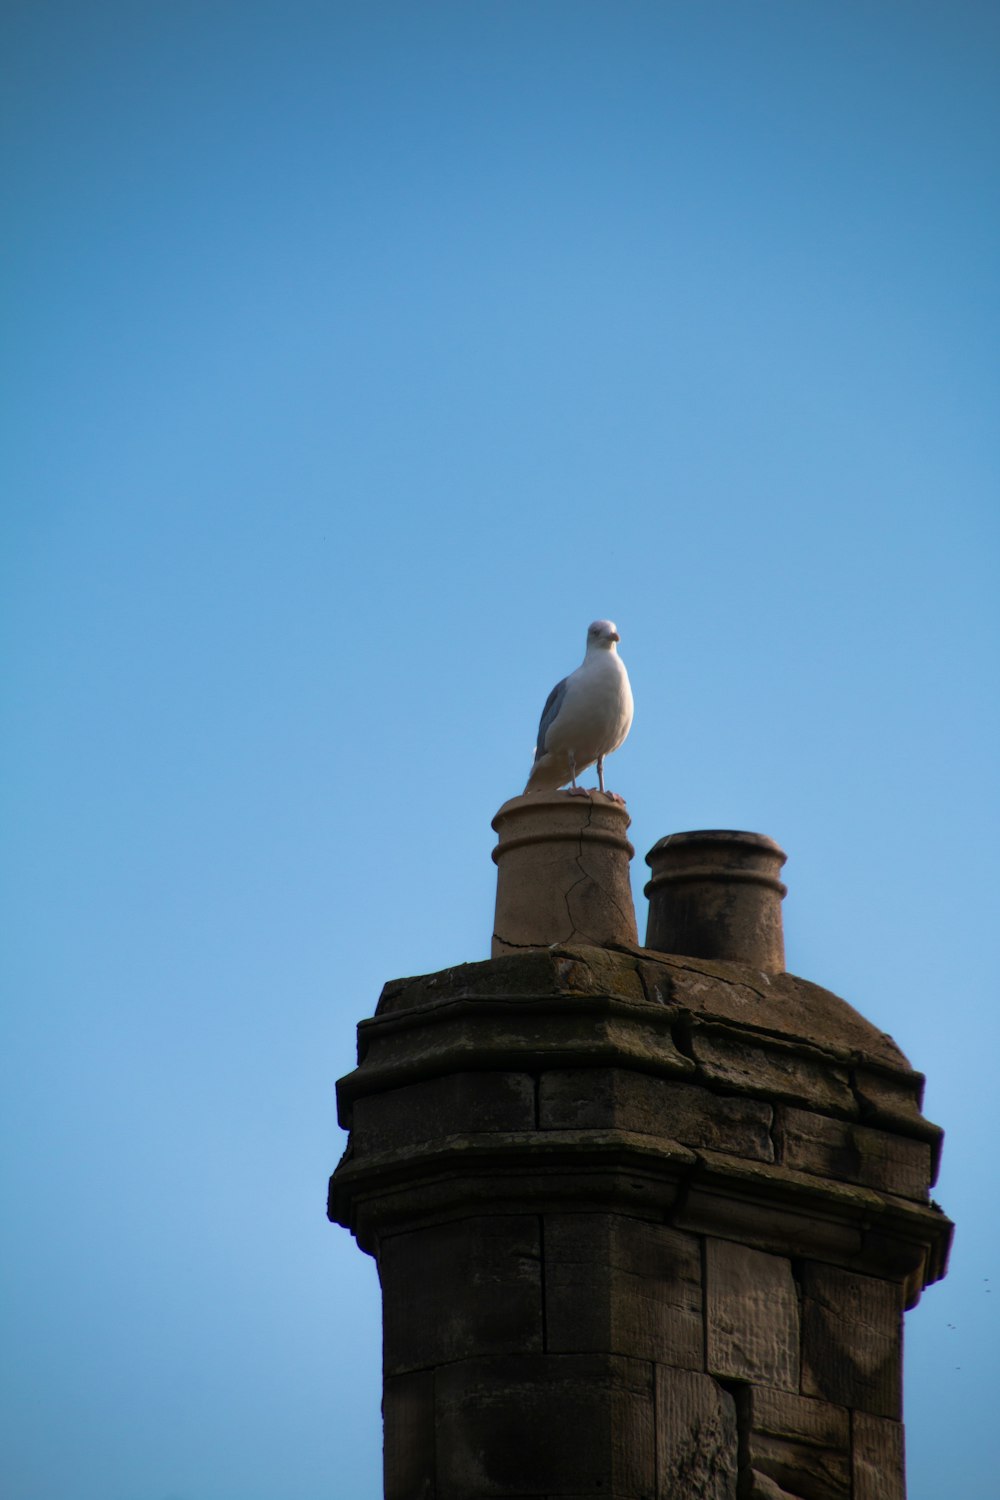 a white bird sitting on top of a brick building